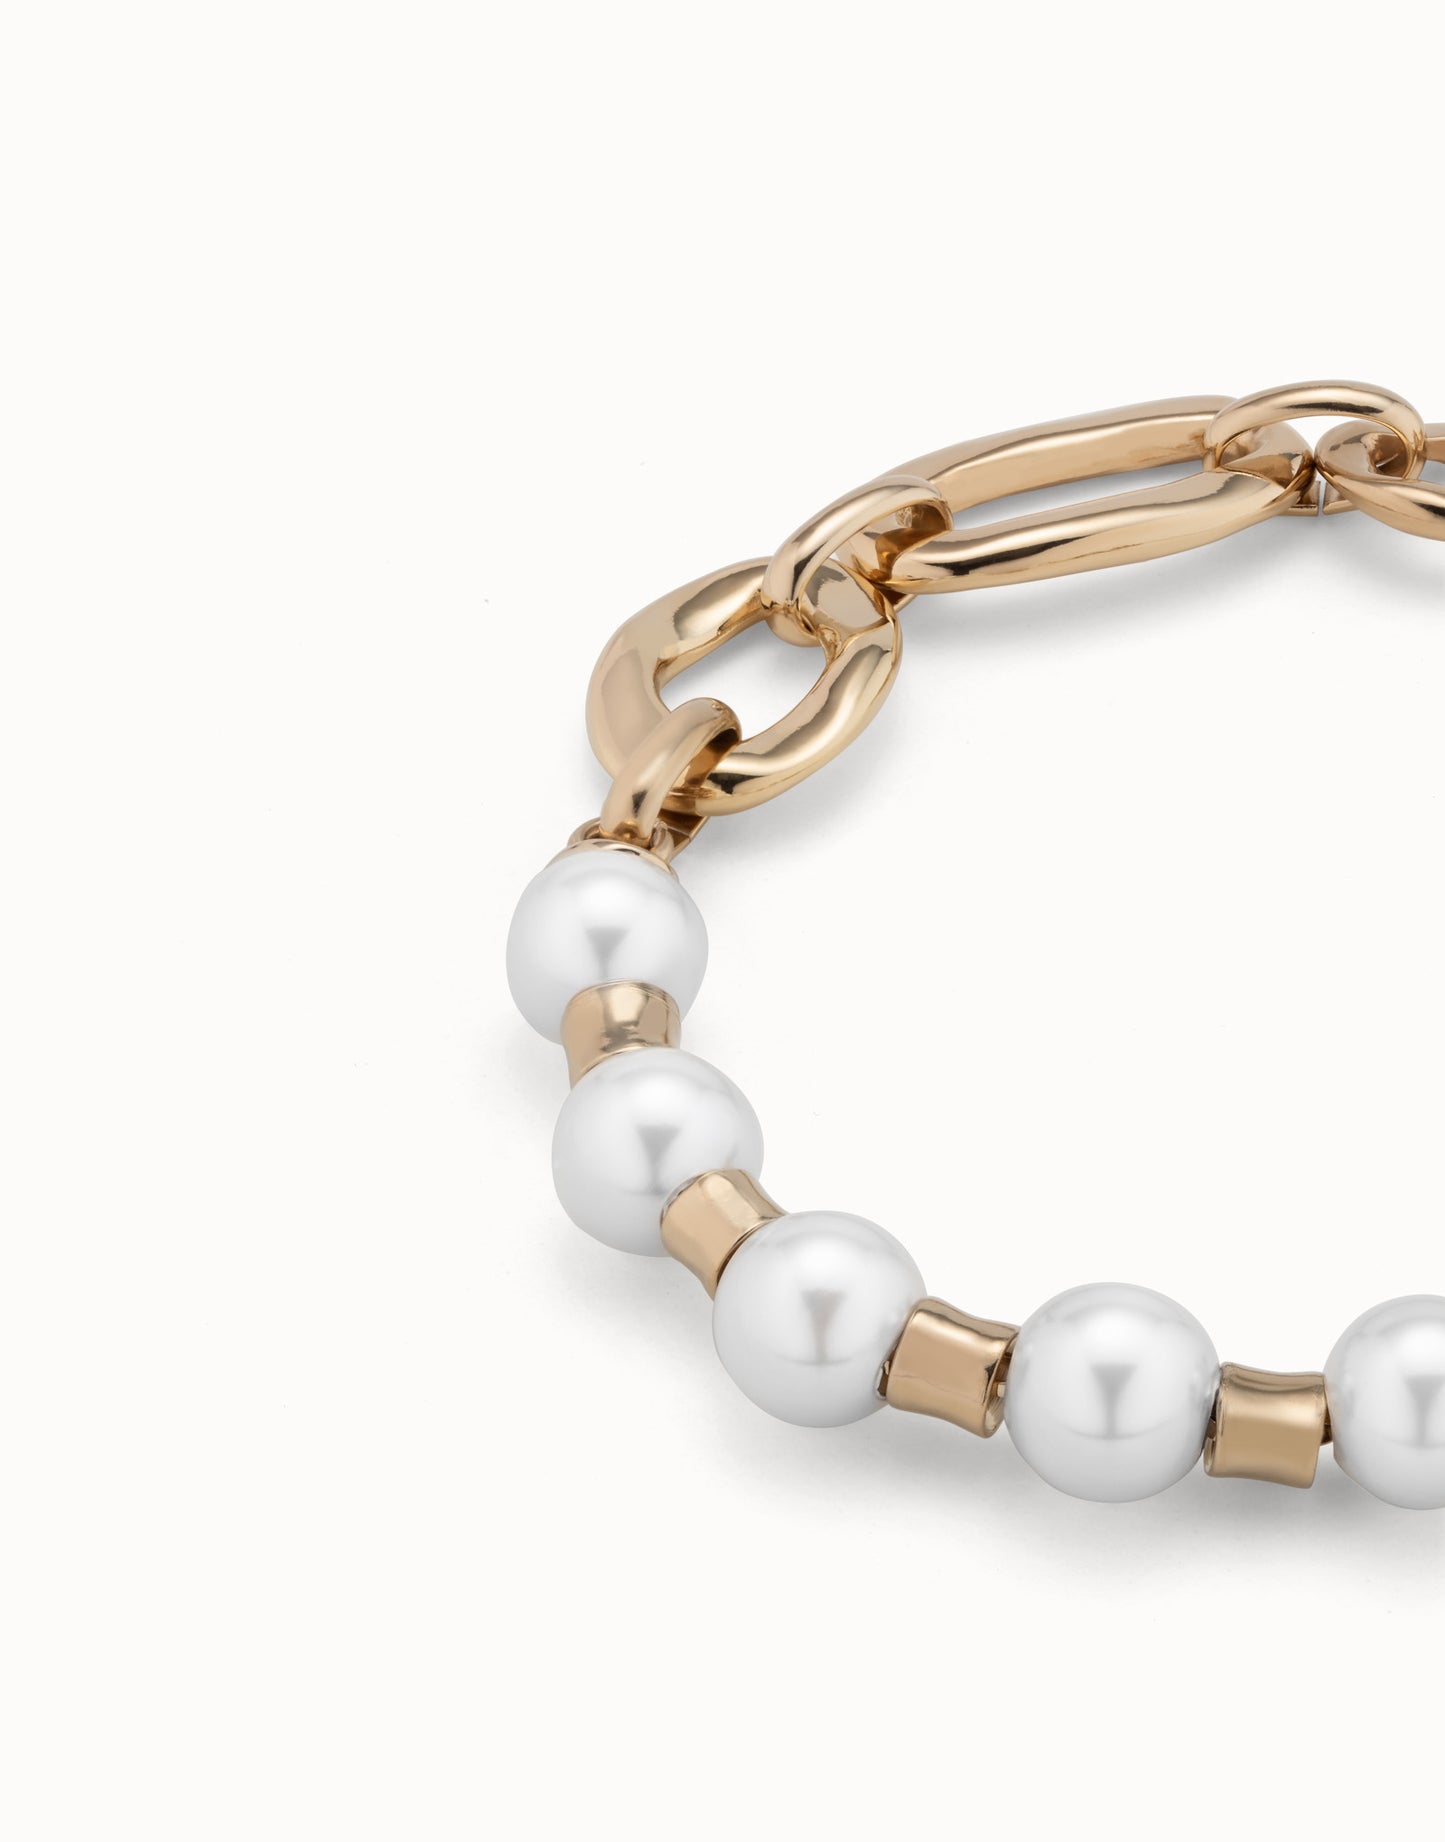 Pearl and Match Bracelet